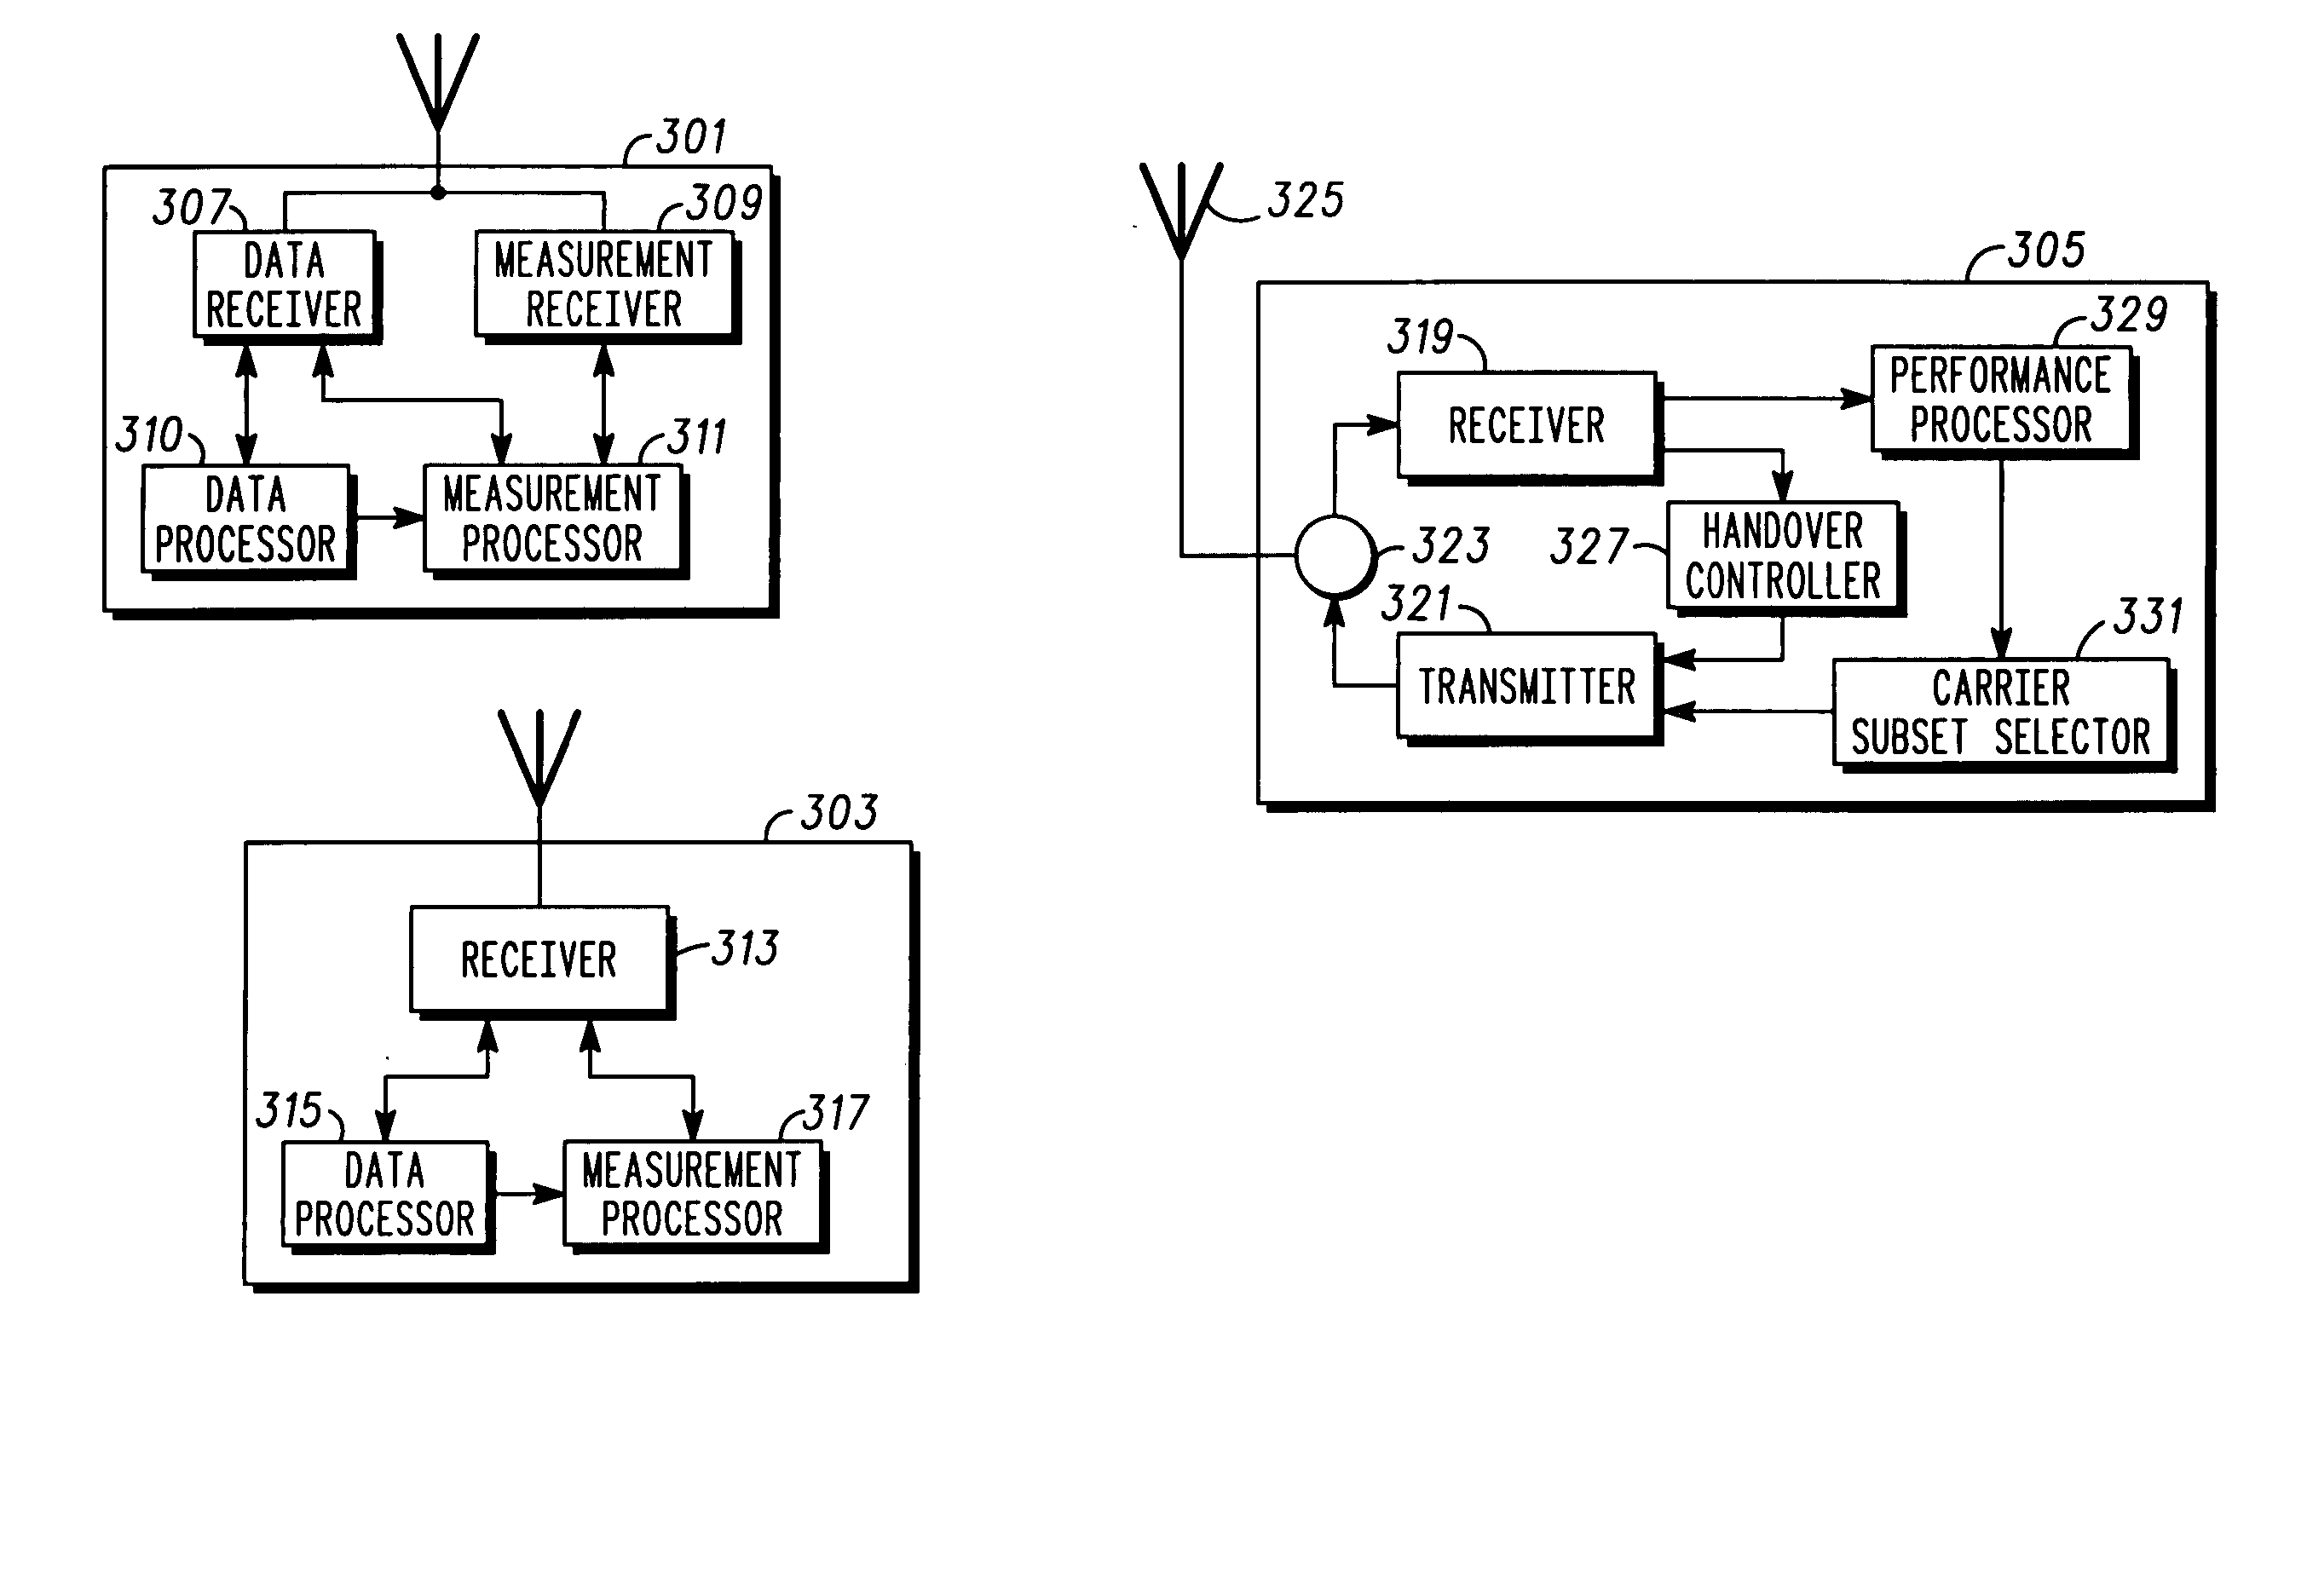 Method and apparatus for selecting carriers